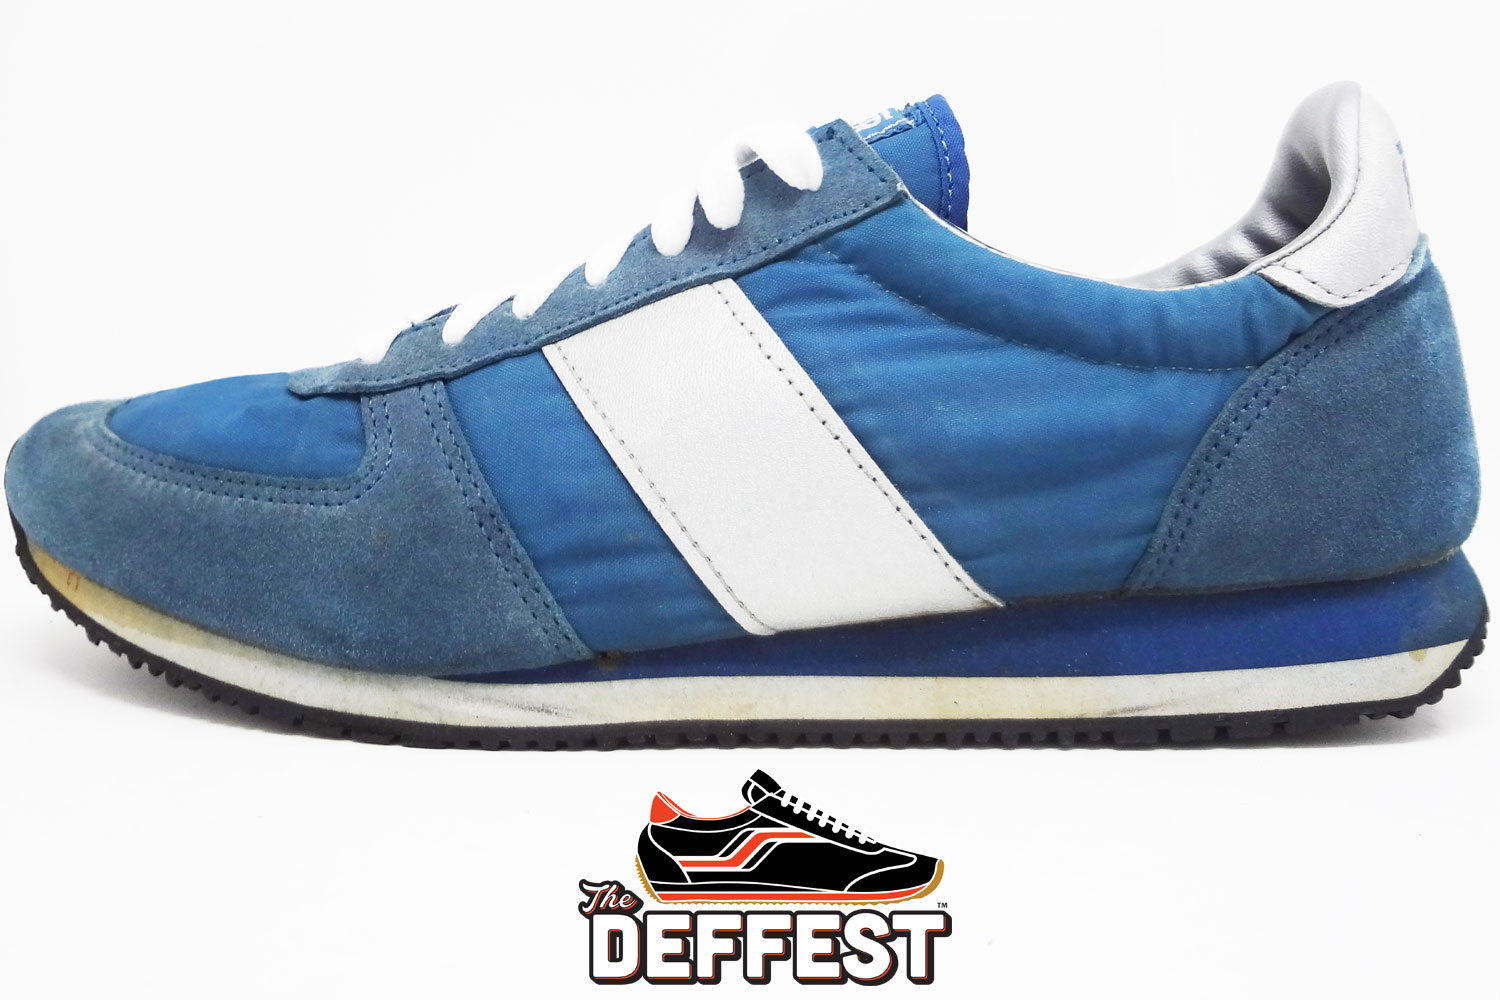 Starker brand 70s 80s vintage sneakers @ The Deffest